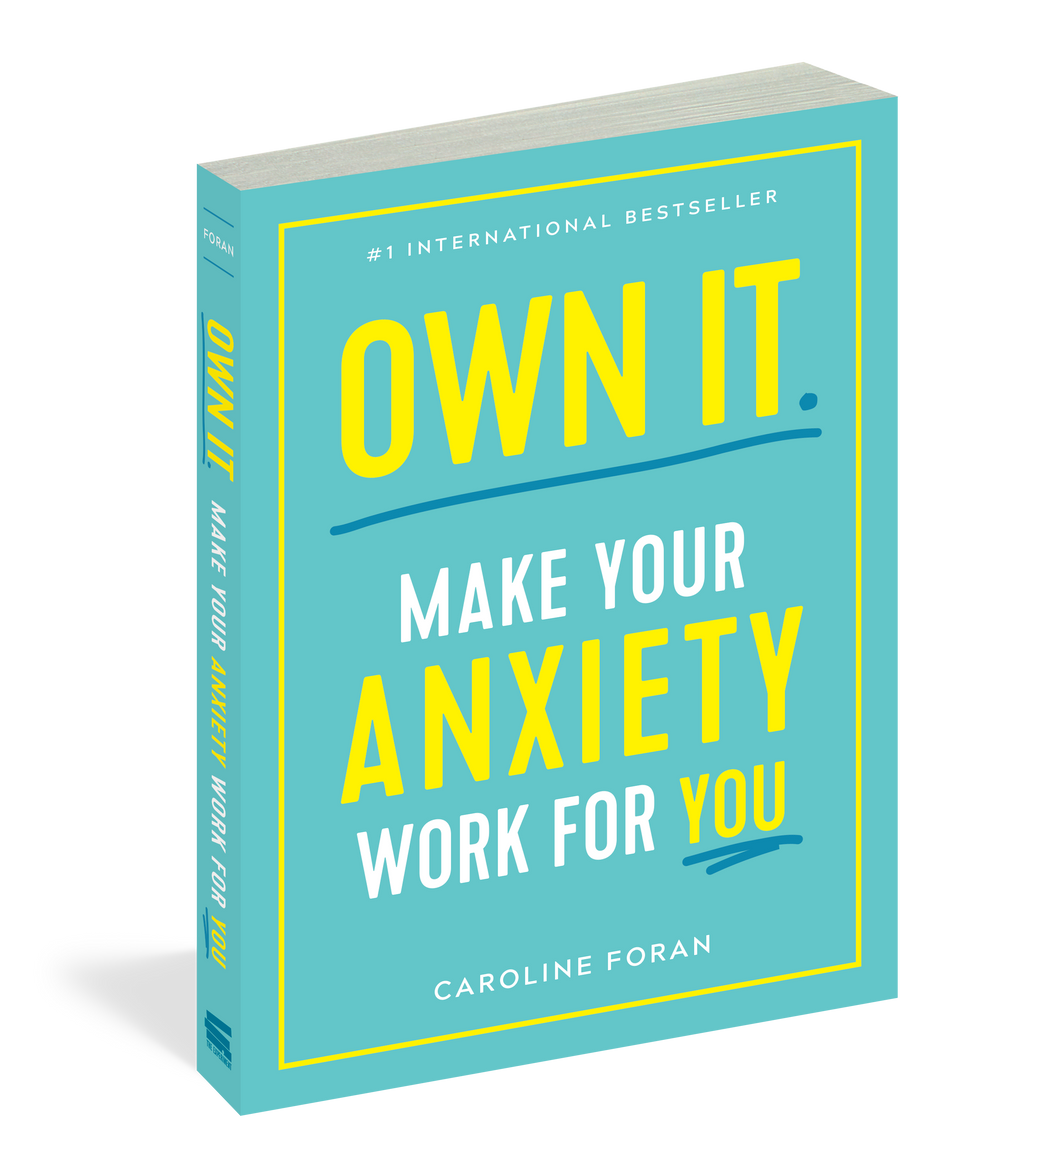 Own It. Make Your Anxiety Work for You